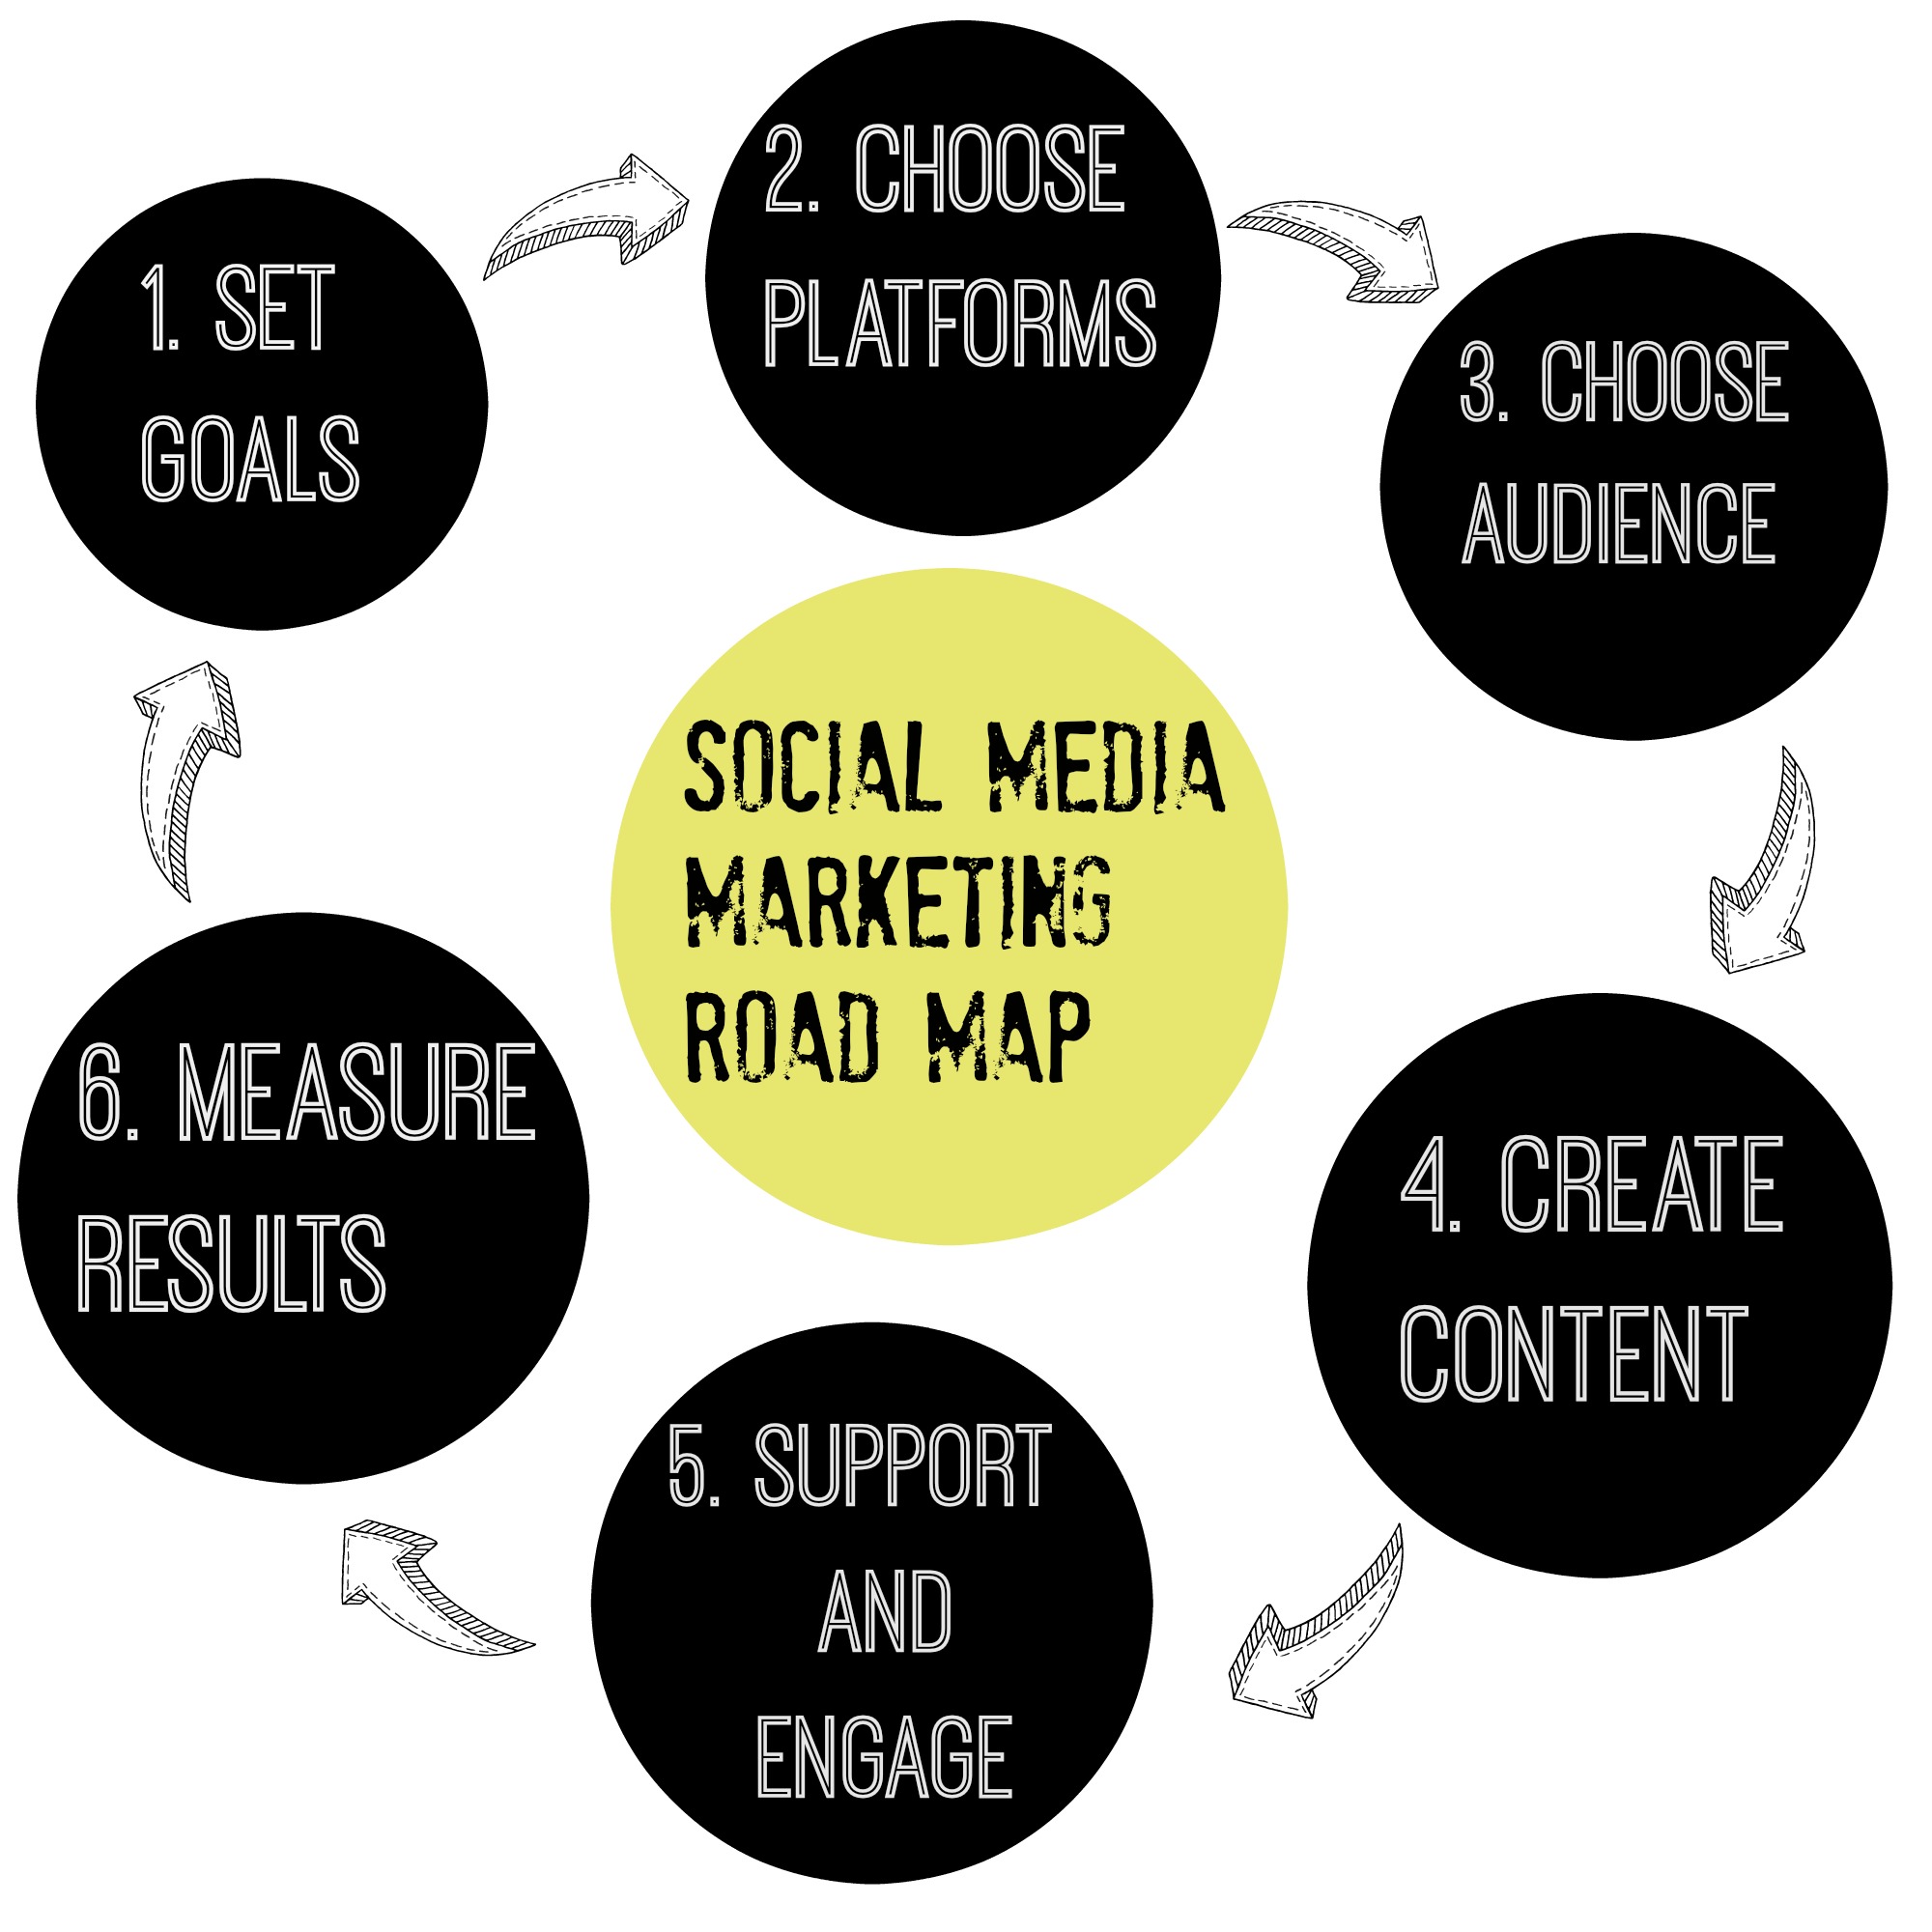 What are the 6 steps of social media marketing?